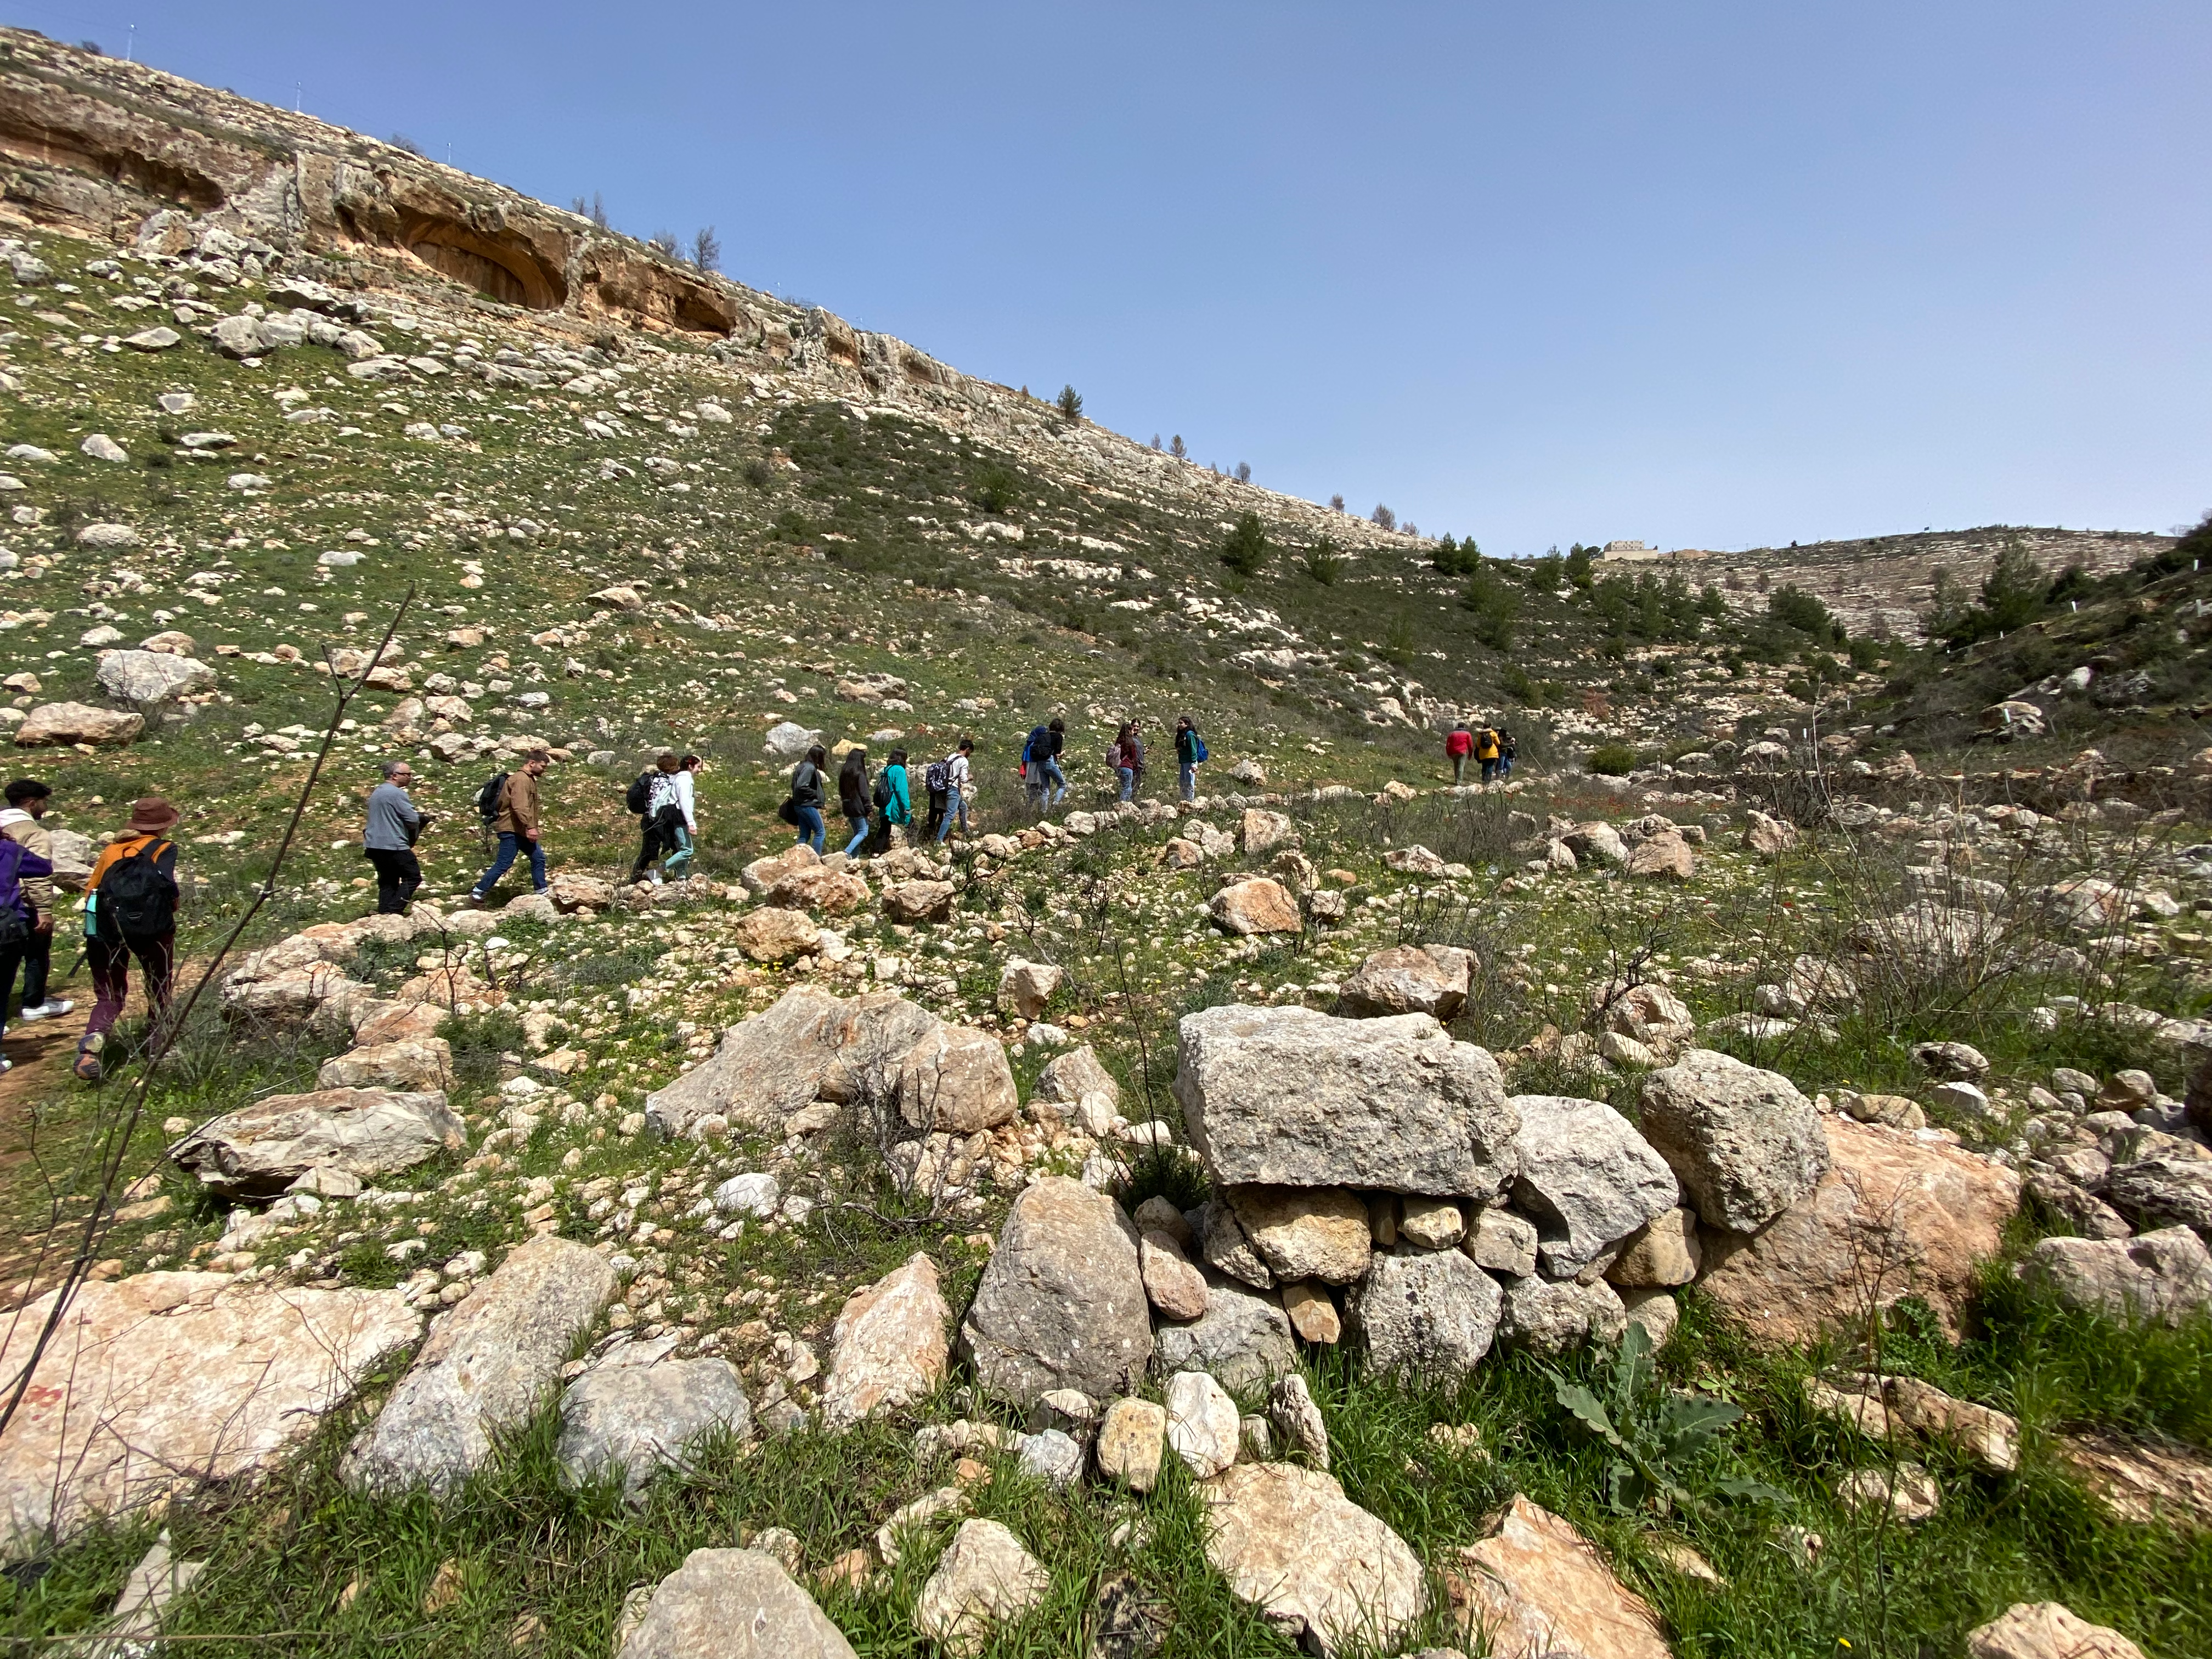 Hikers head up a hill on a trail, single file.